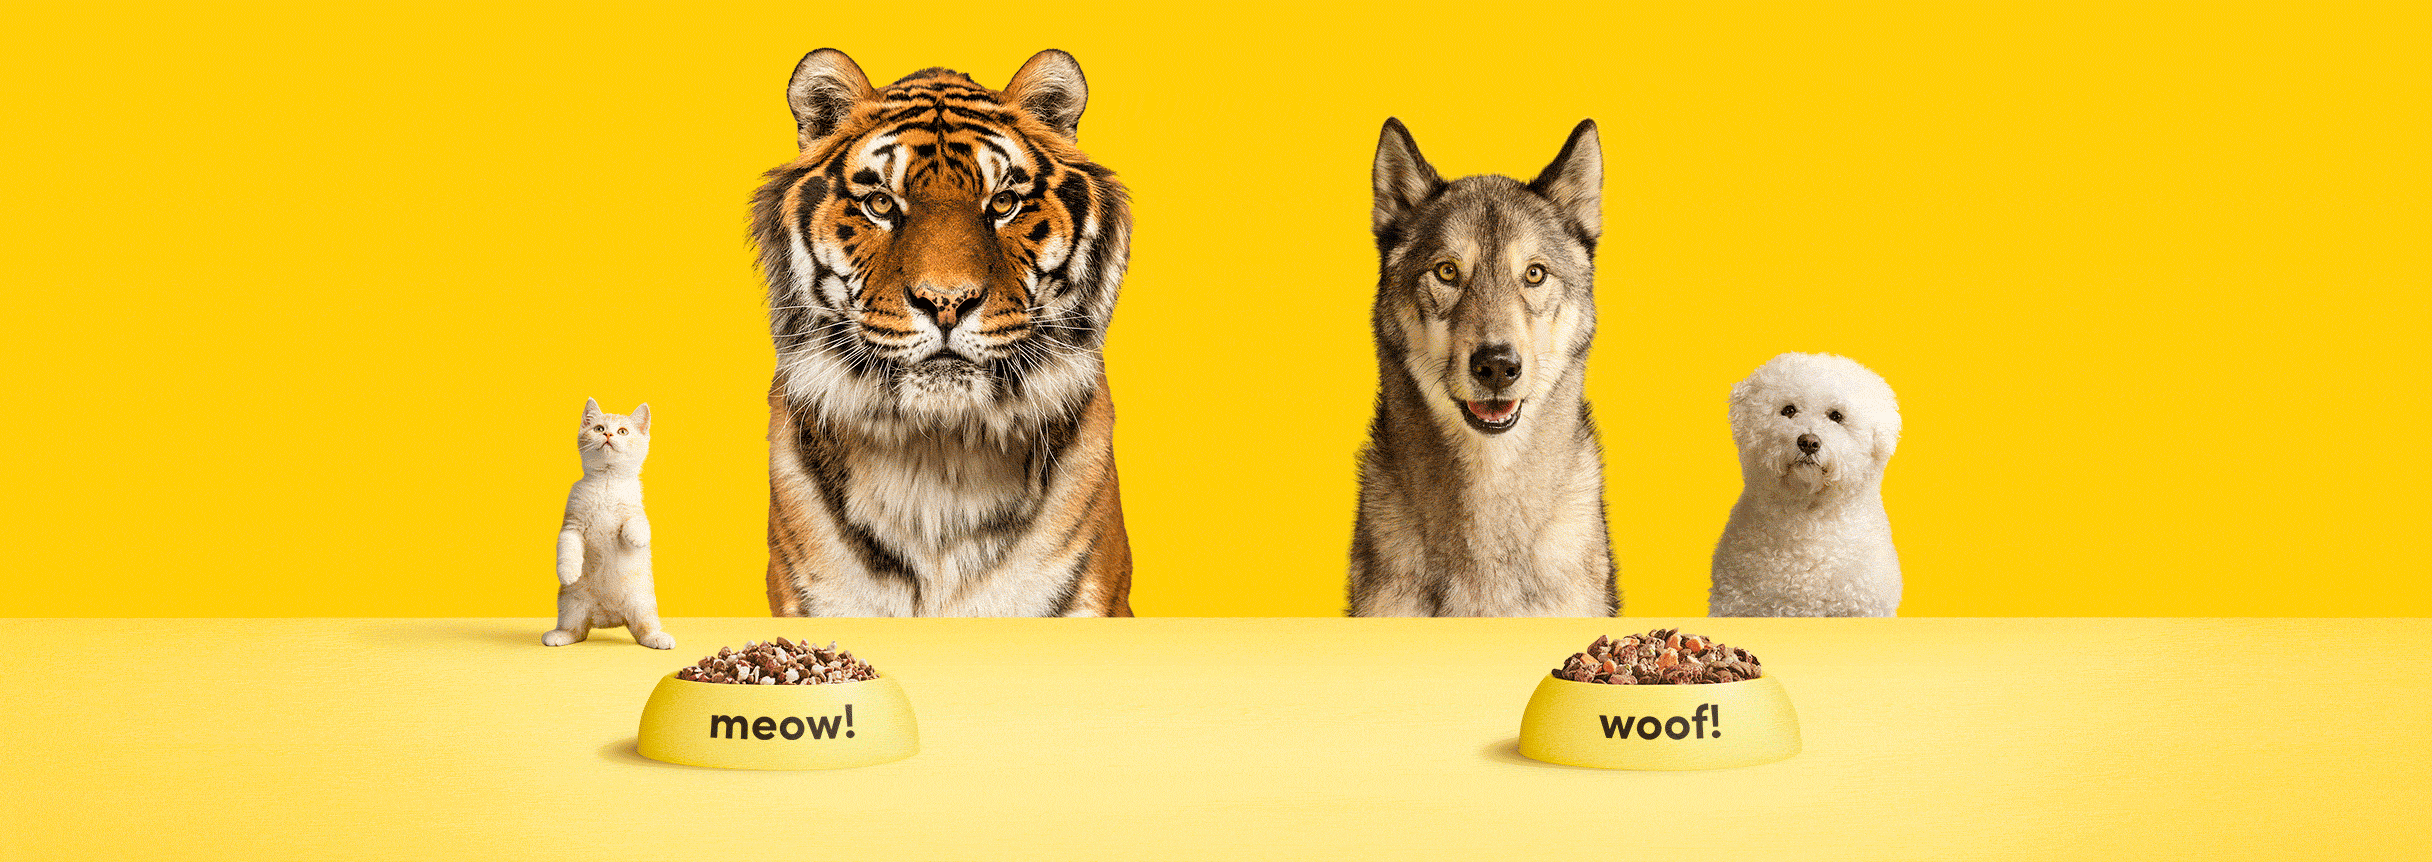 cats and dogs, tigers and wolves